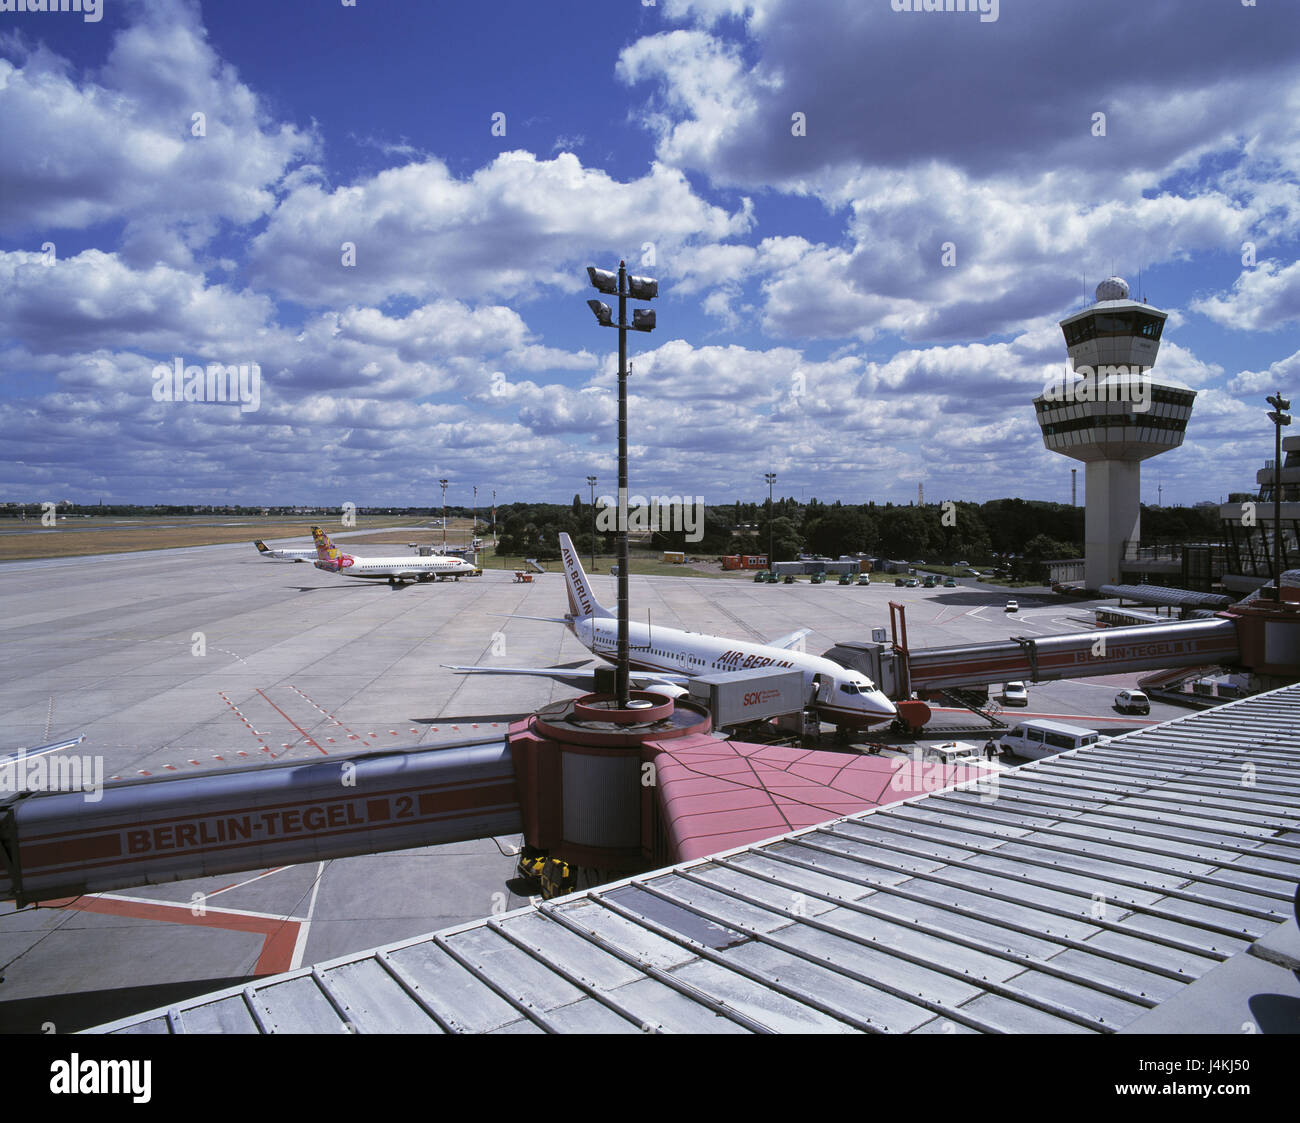 Germany, Berlin, Tegel, airport, Tower, rolling trajectory, airplanes, overview, no property release, Europe, town, capital, airport grounds, airport terminal, air liners, air traffic, transportation of human beings, transport, fly, promotion, travel, journey by air, means of transportation, traffic airplane, civil aviation, tourism Stock Photo